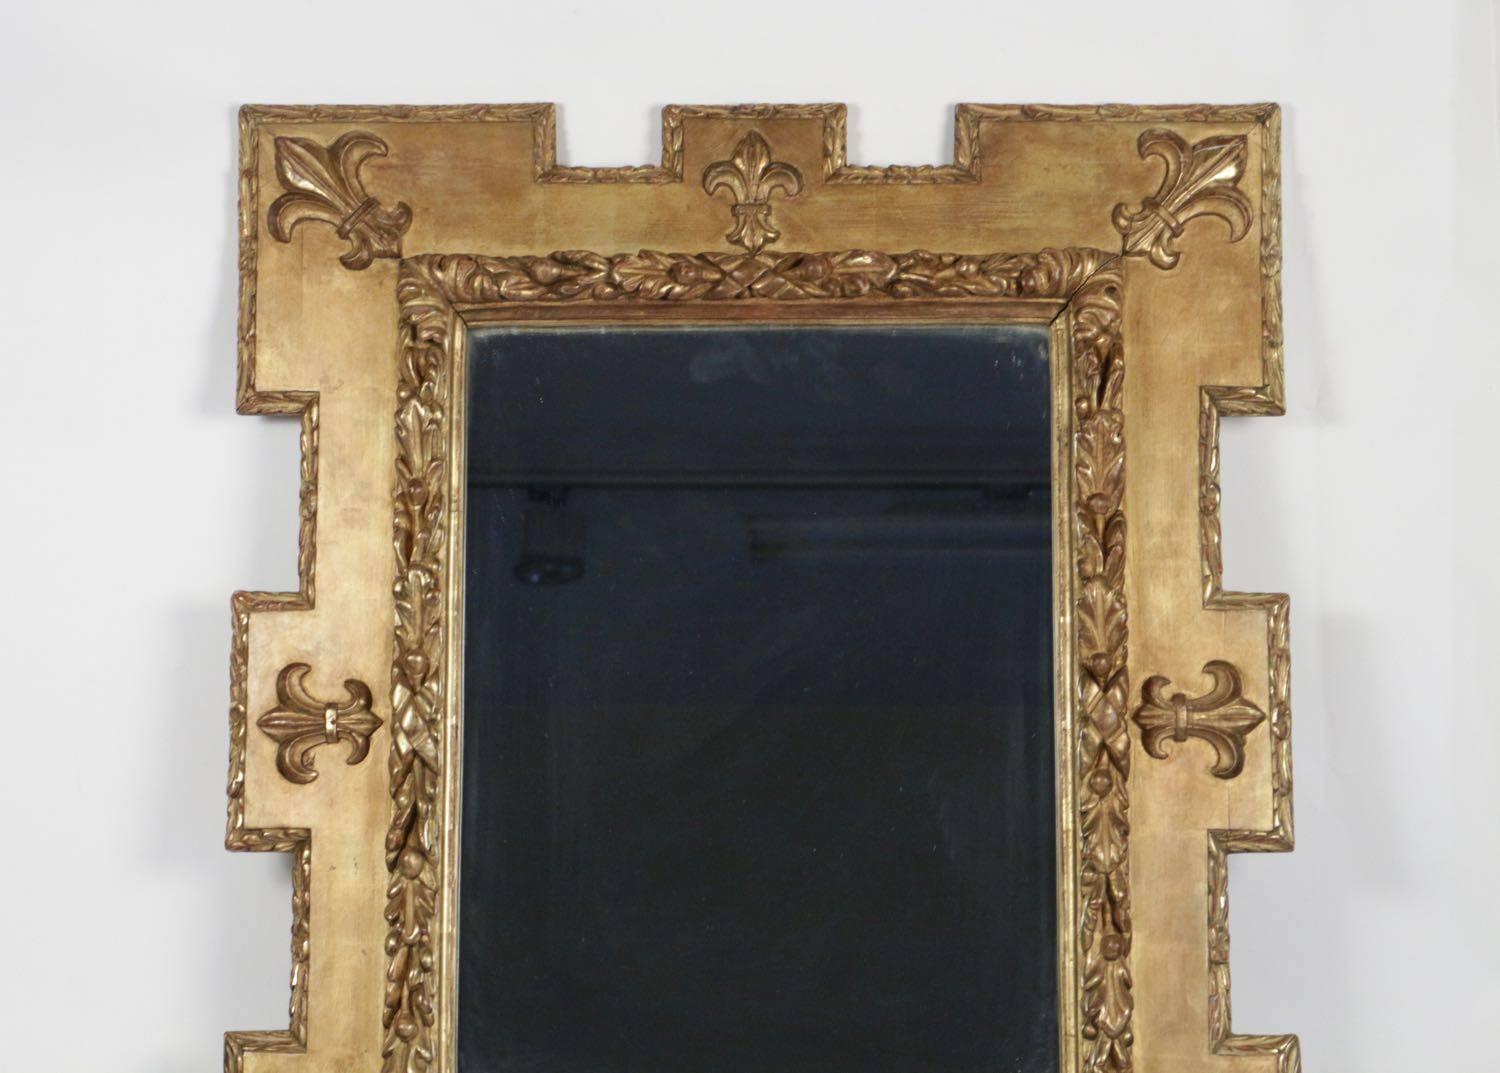 Very pretty gold giltwood and gesso mirror with the fleur de lys design from the 19th century. Original mercury mirror. Measures: H 93cm, L 78cm, P 7cm.
 